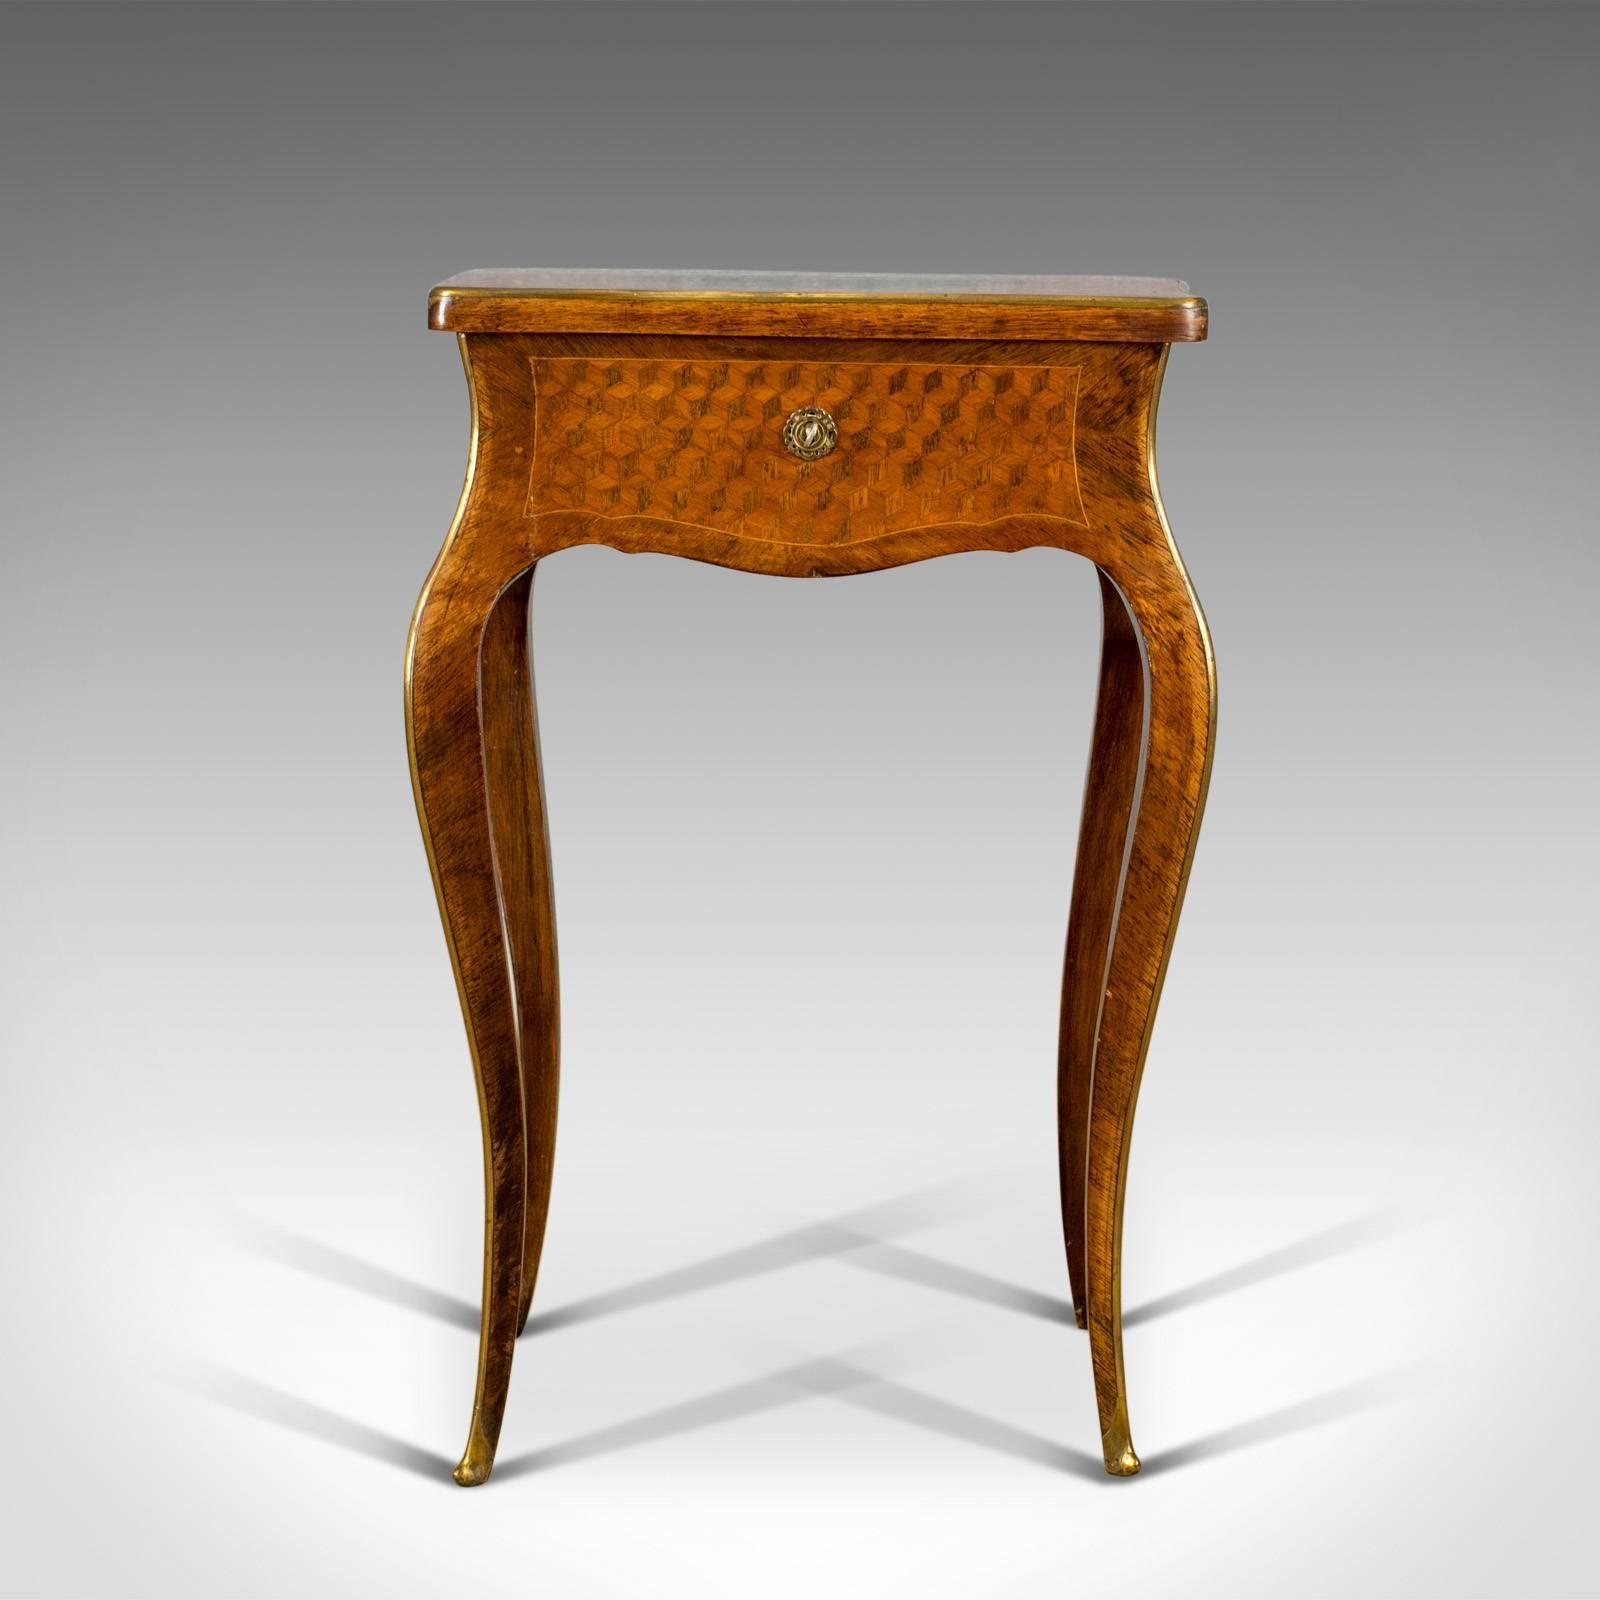 This is a French antique vanity table, a jewelry box table in kingwood dating to the late 19th century, circa 1880.

The kingwood displaying good color and grain interest
Finished in an appealing 'jeux de fond' cube marquetry
Attractive French